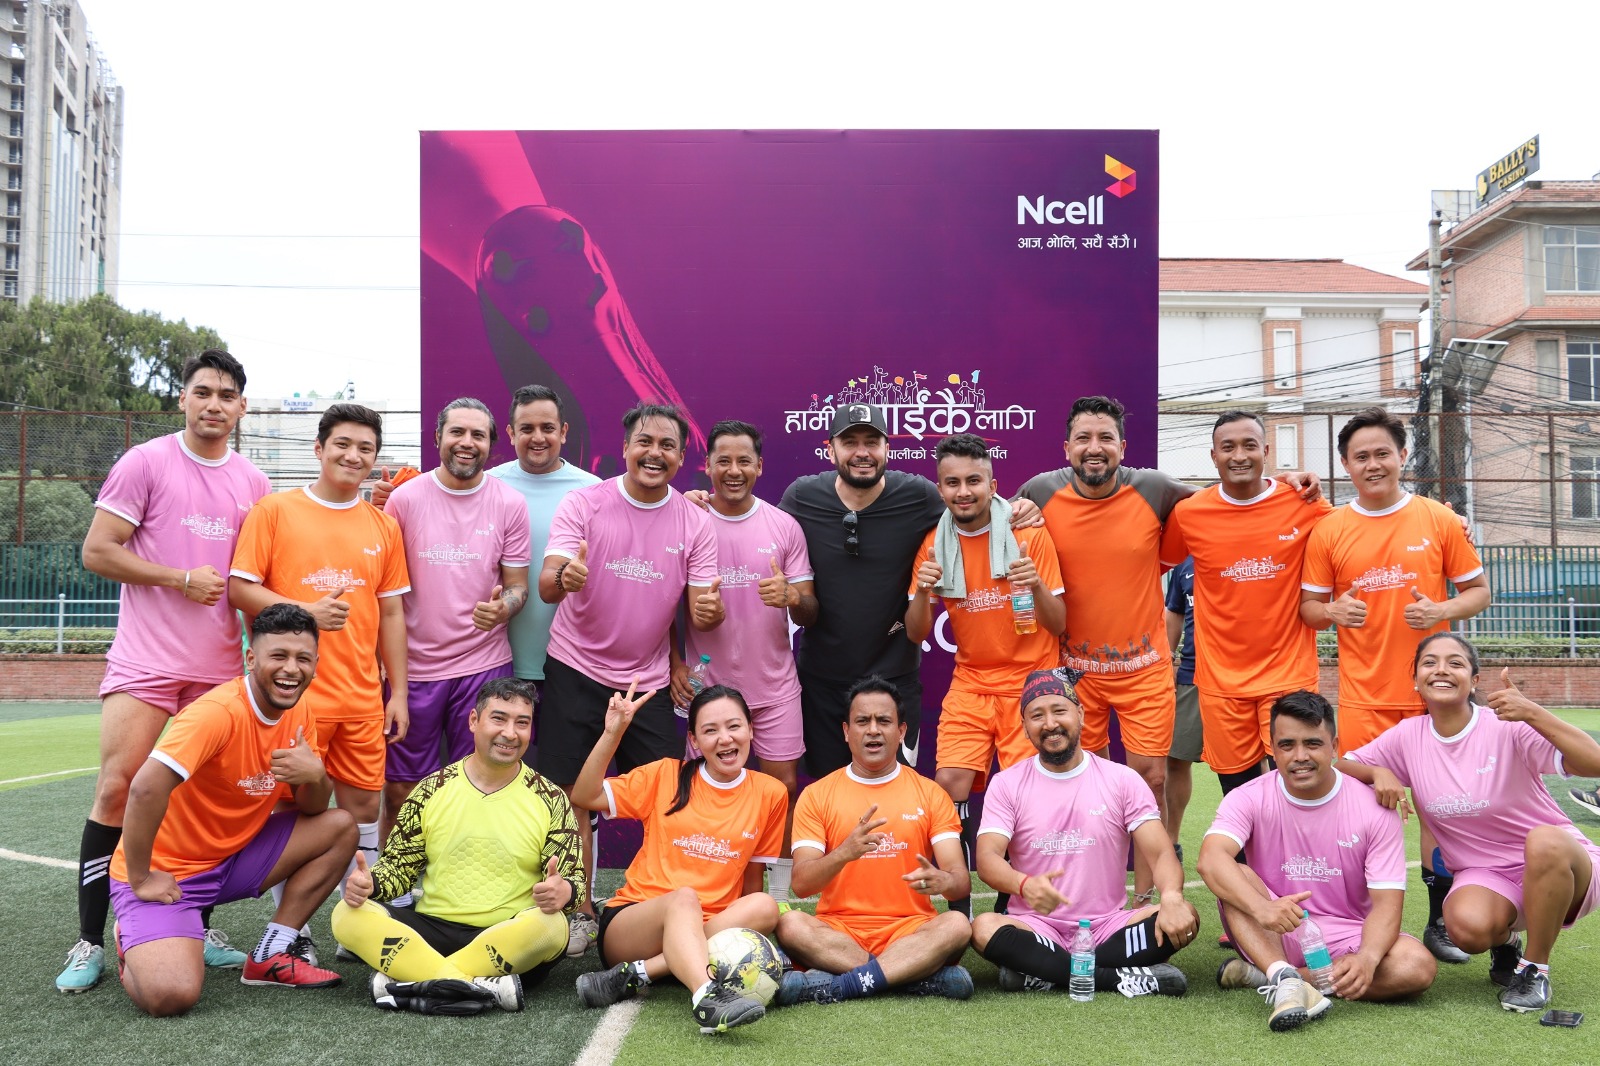 Ncell hosts ‘Purple Kickoff’ in celebration marking 18th anniversary